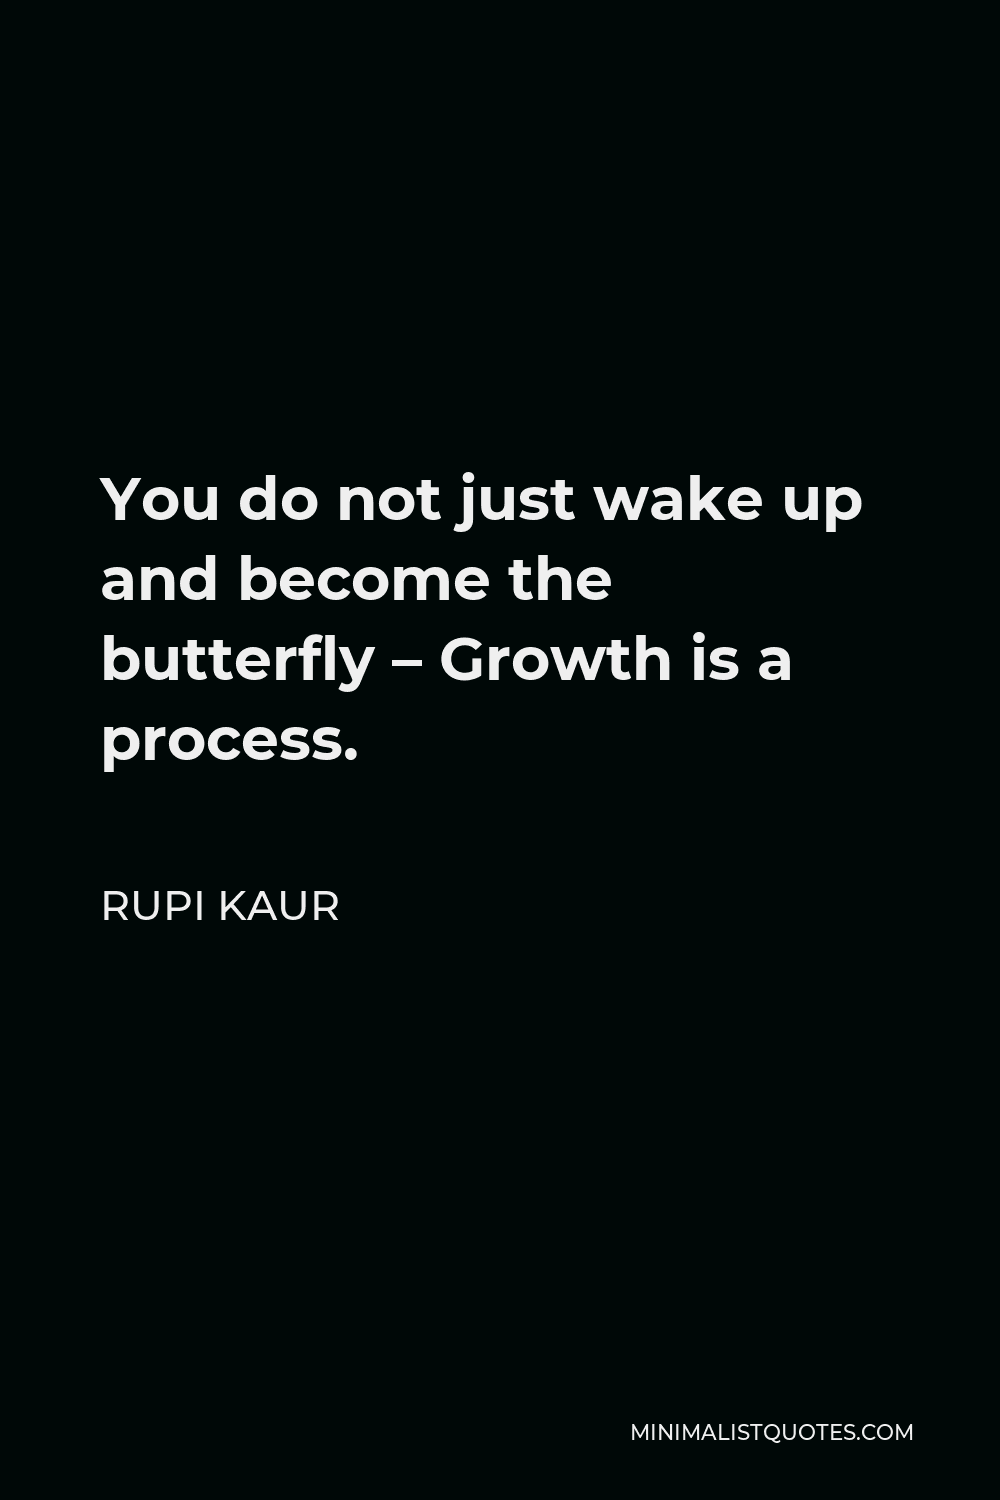 Rupi Kaur Quote - You do not just wake up and become the butterfly – Growth is a process.